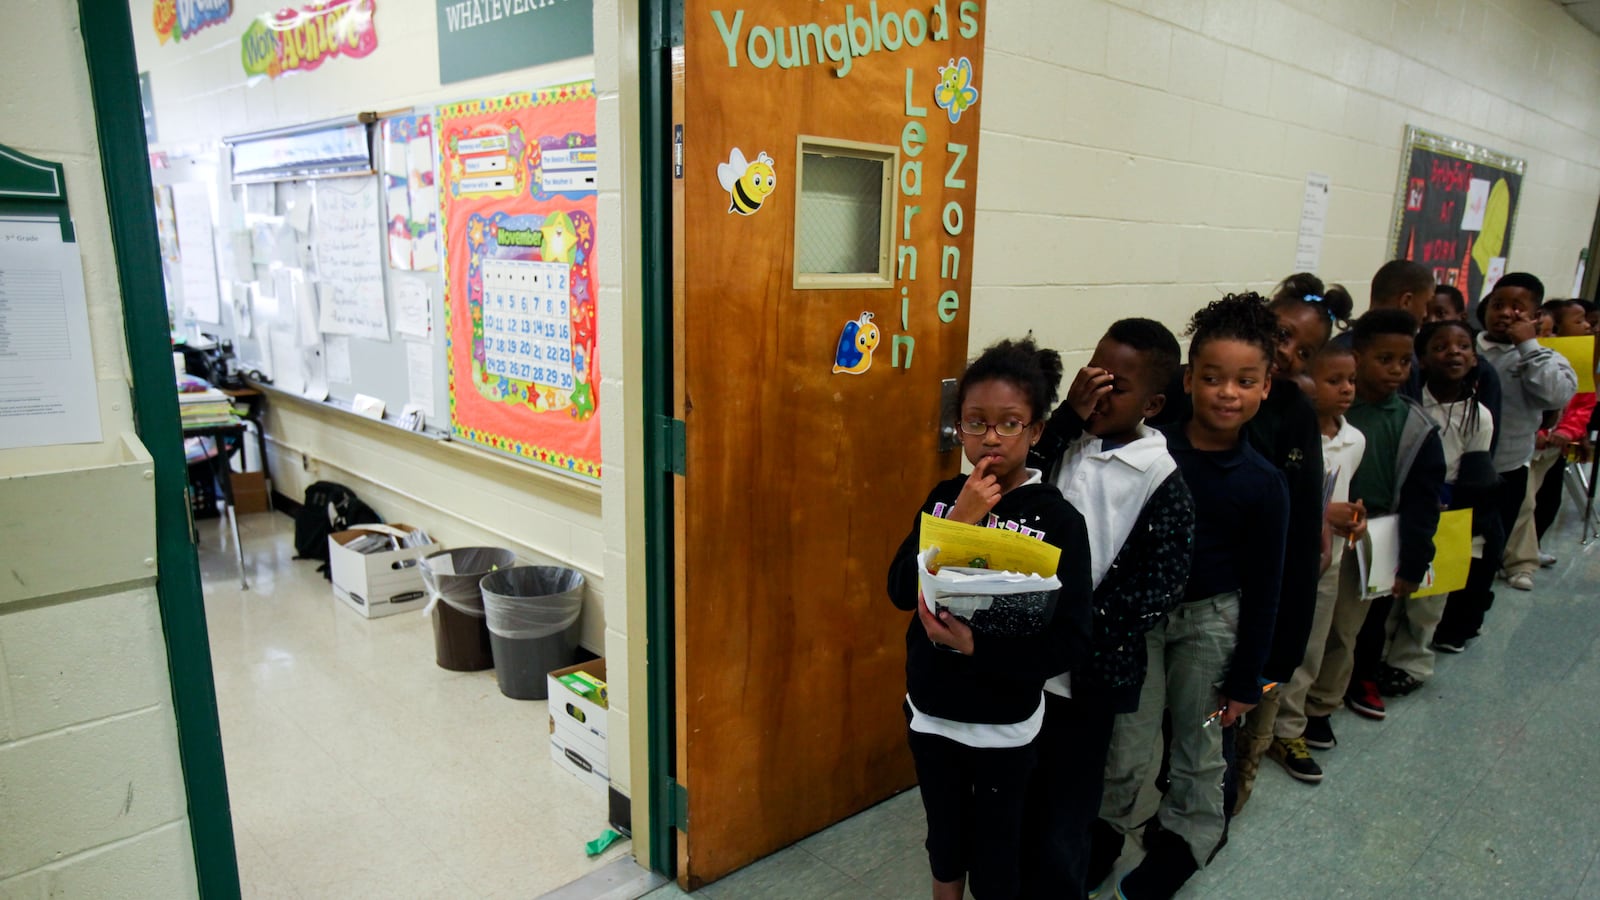 Despite some progress in closing the achievement gap among the nation's African-American students and their peers over the last 15 years, black students continue to perform at significantly lower levels in K-12 education in every state, including Tennessee, according to a 2015 national report.